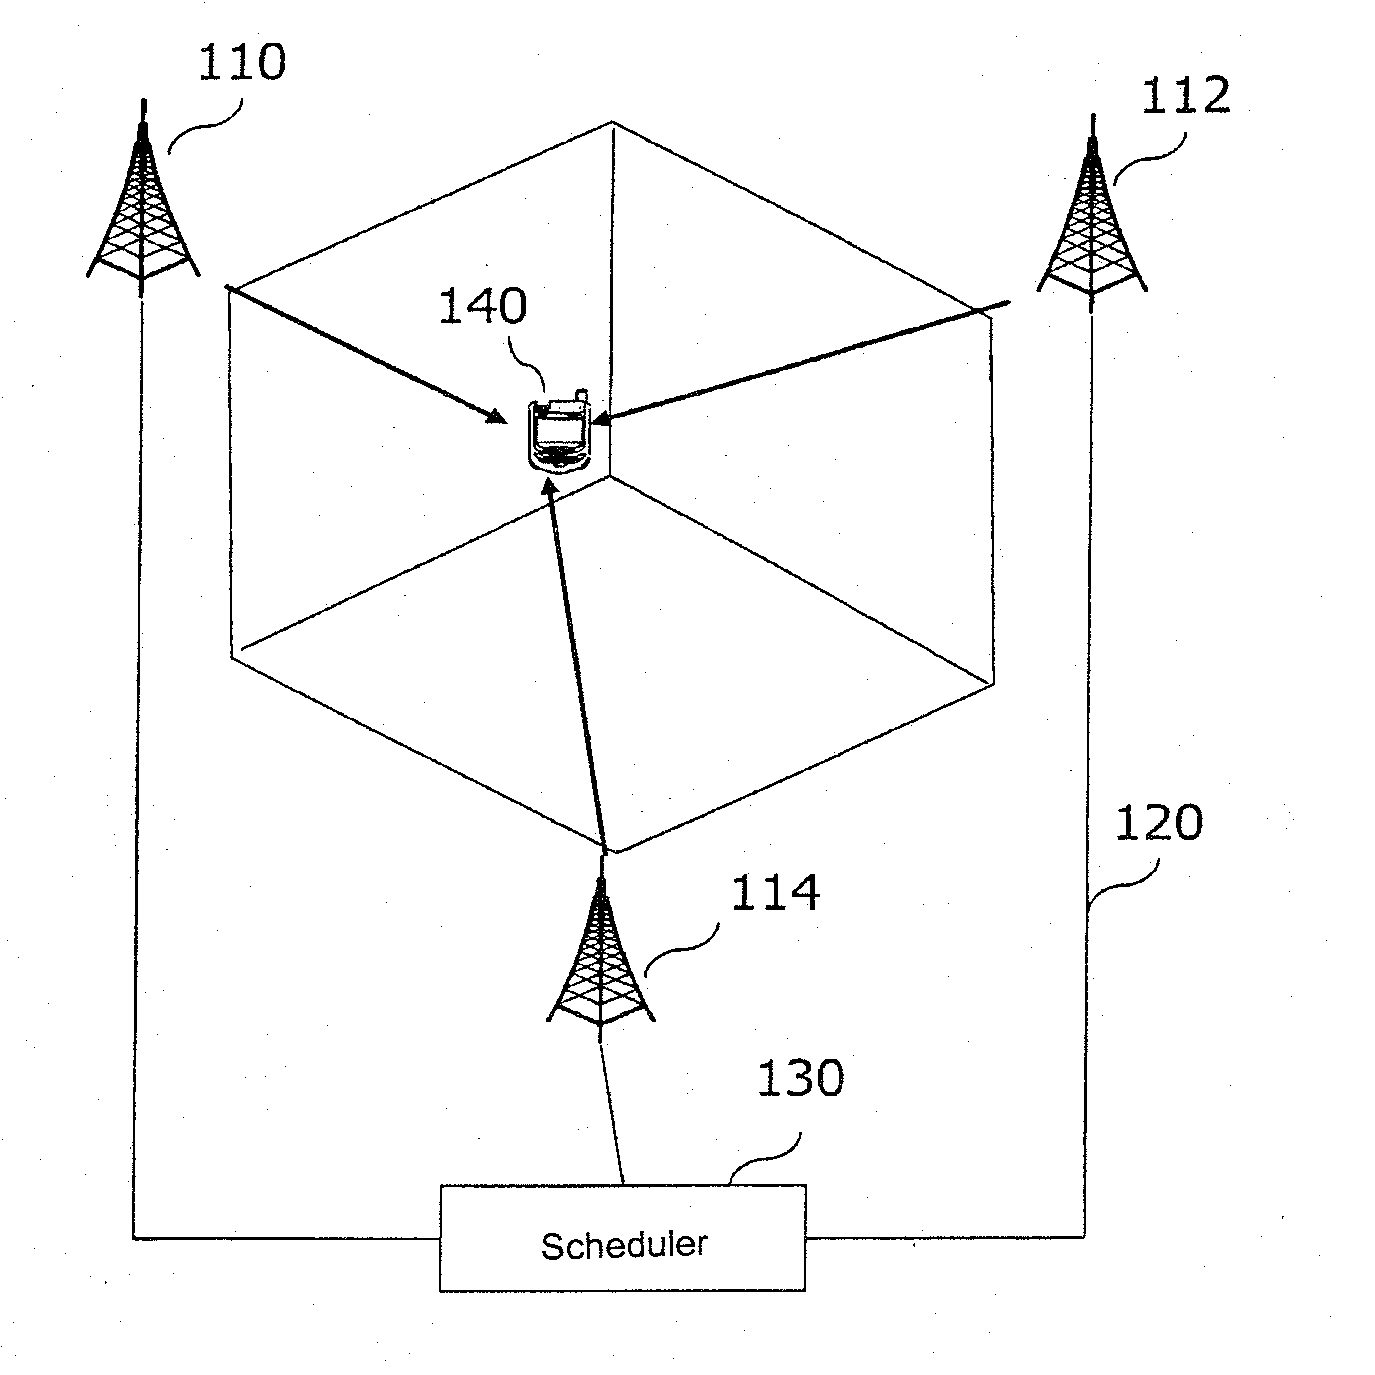 Method and Apparatus for Data Communication Through a Coordinated Multi-Point Transmission